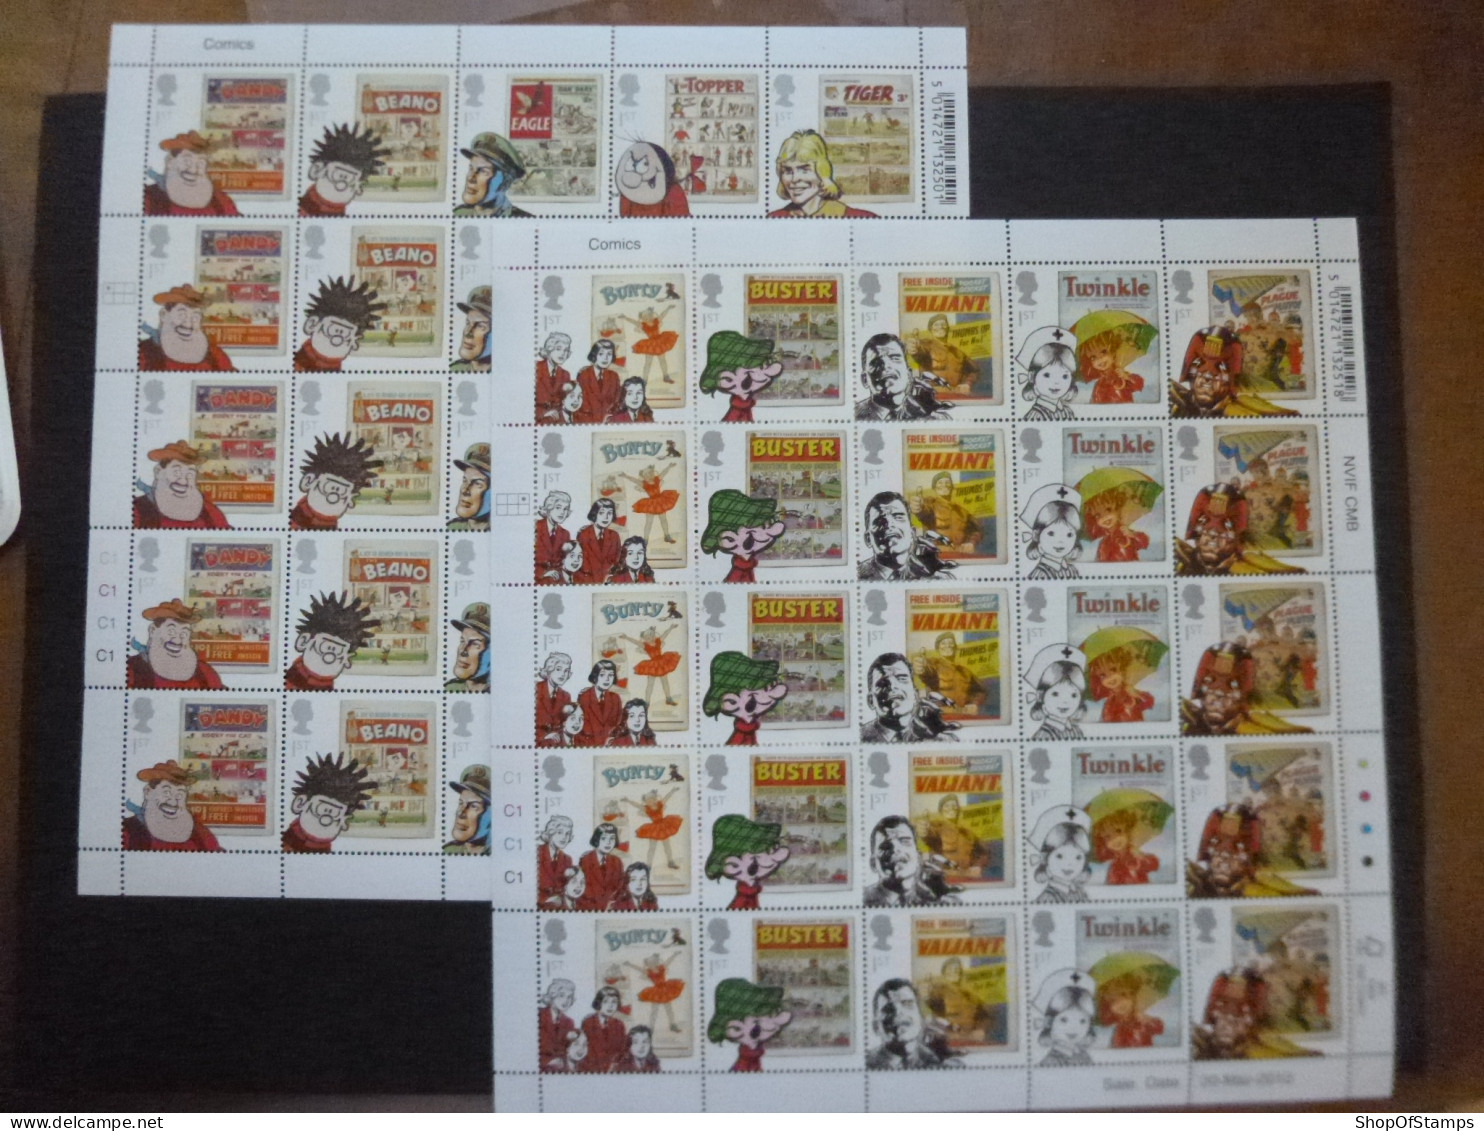 GREAT BRITAIN SG 3187+  2012 COMICS 2 FULL SHEETS 50 STAMPS - Feuilles, Planches  Et Multiples